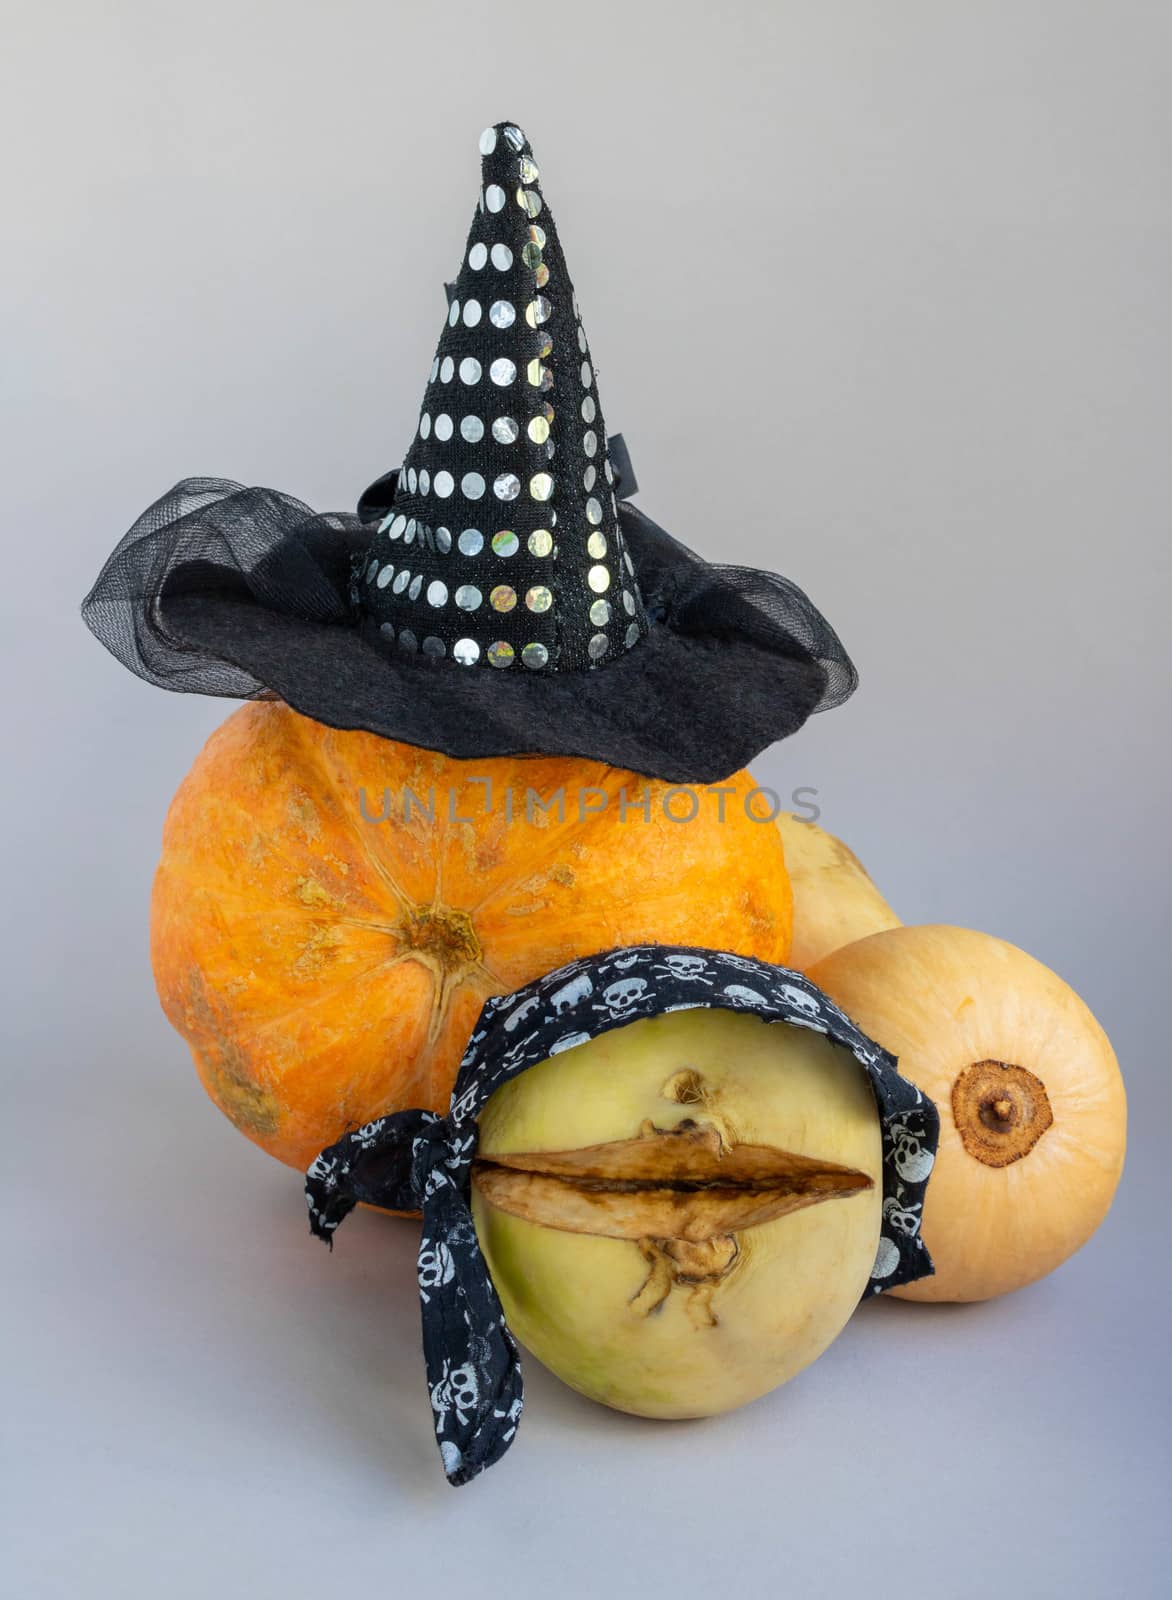 The Concept Of Halloween. Orange pumpkin in a witch's hat, pumpkin and turnip in a pirate bandana by lapushka62